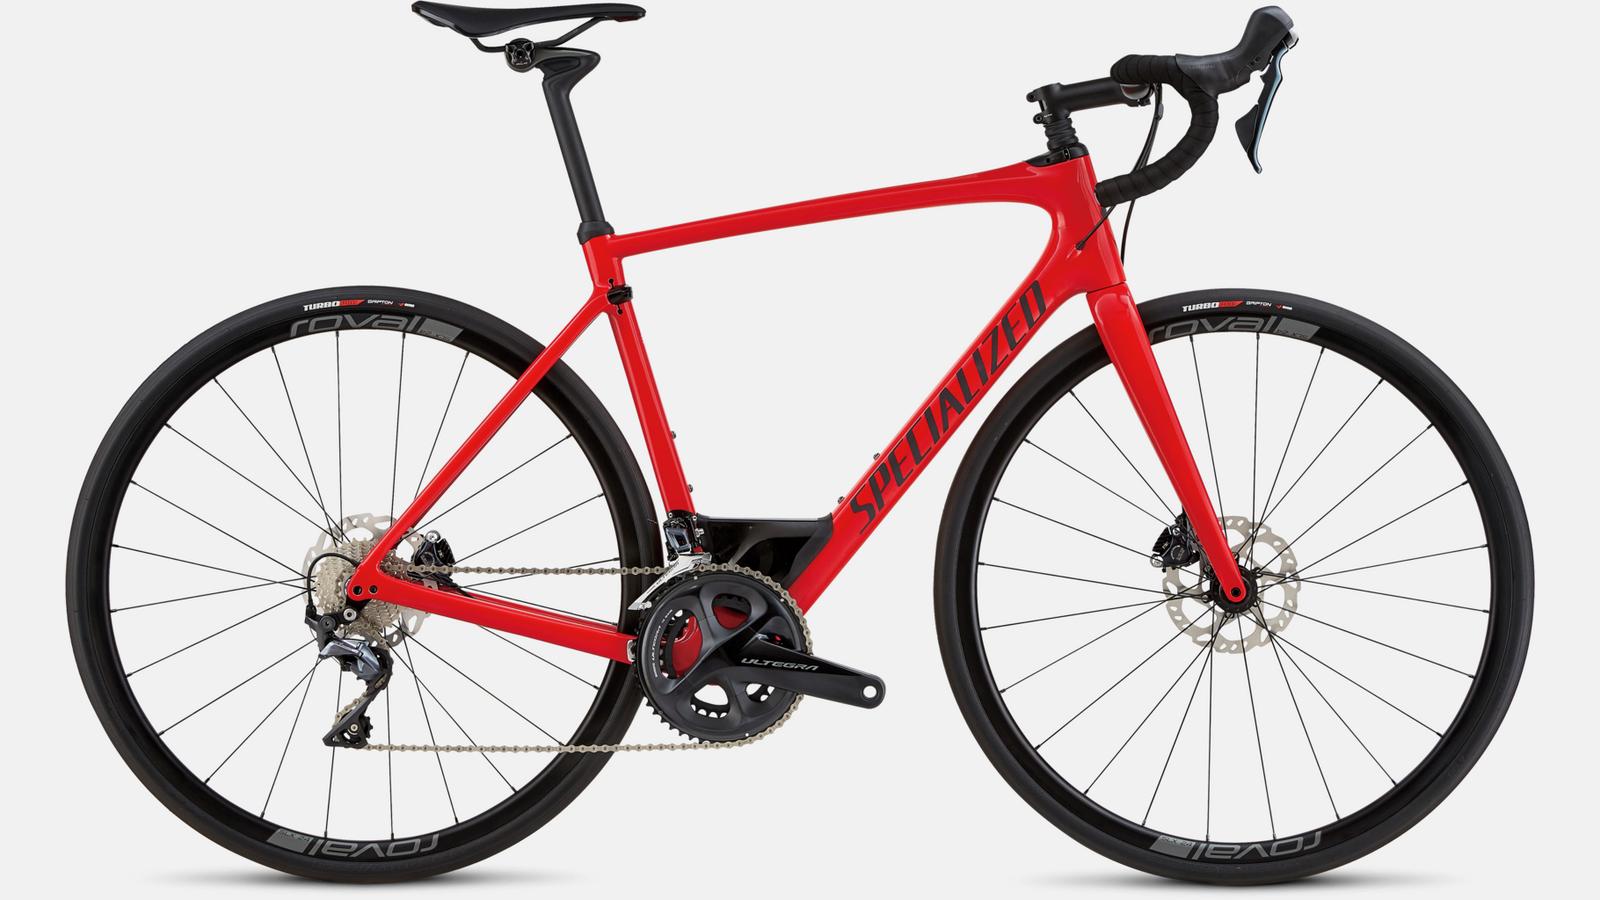 Paint for 2018 Specialized Roubaix Expert - Gloss Flo Red